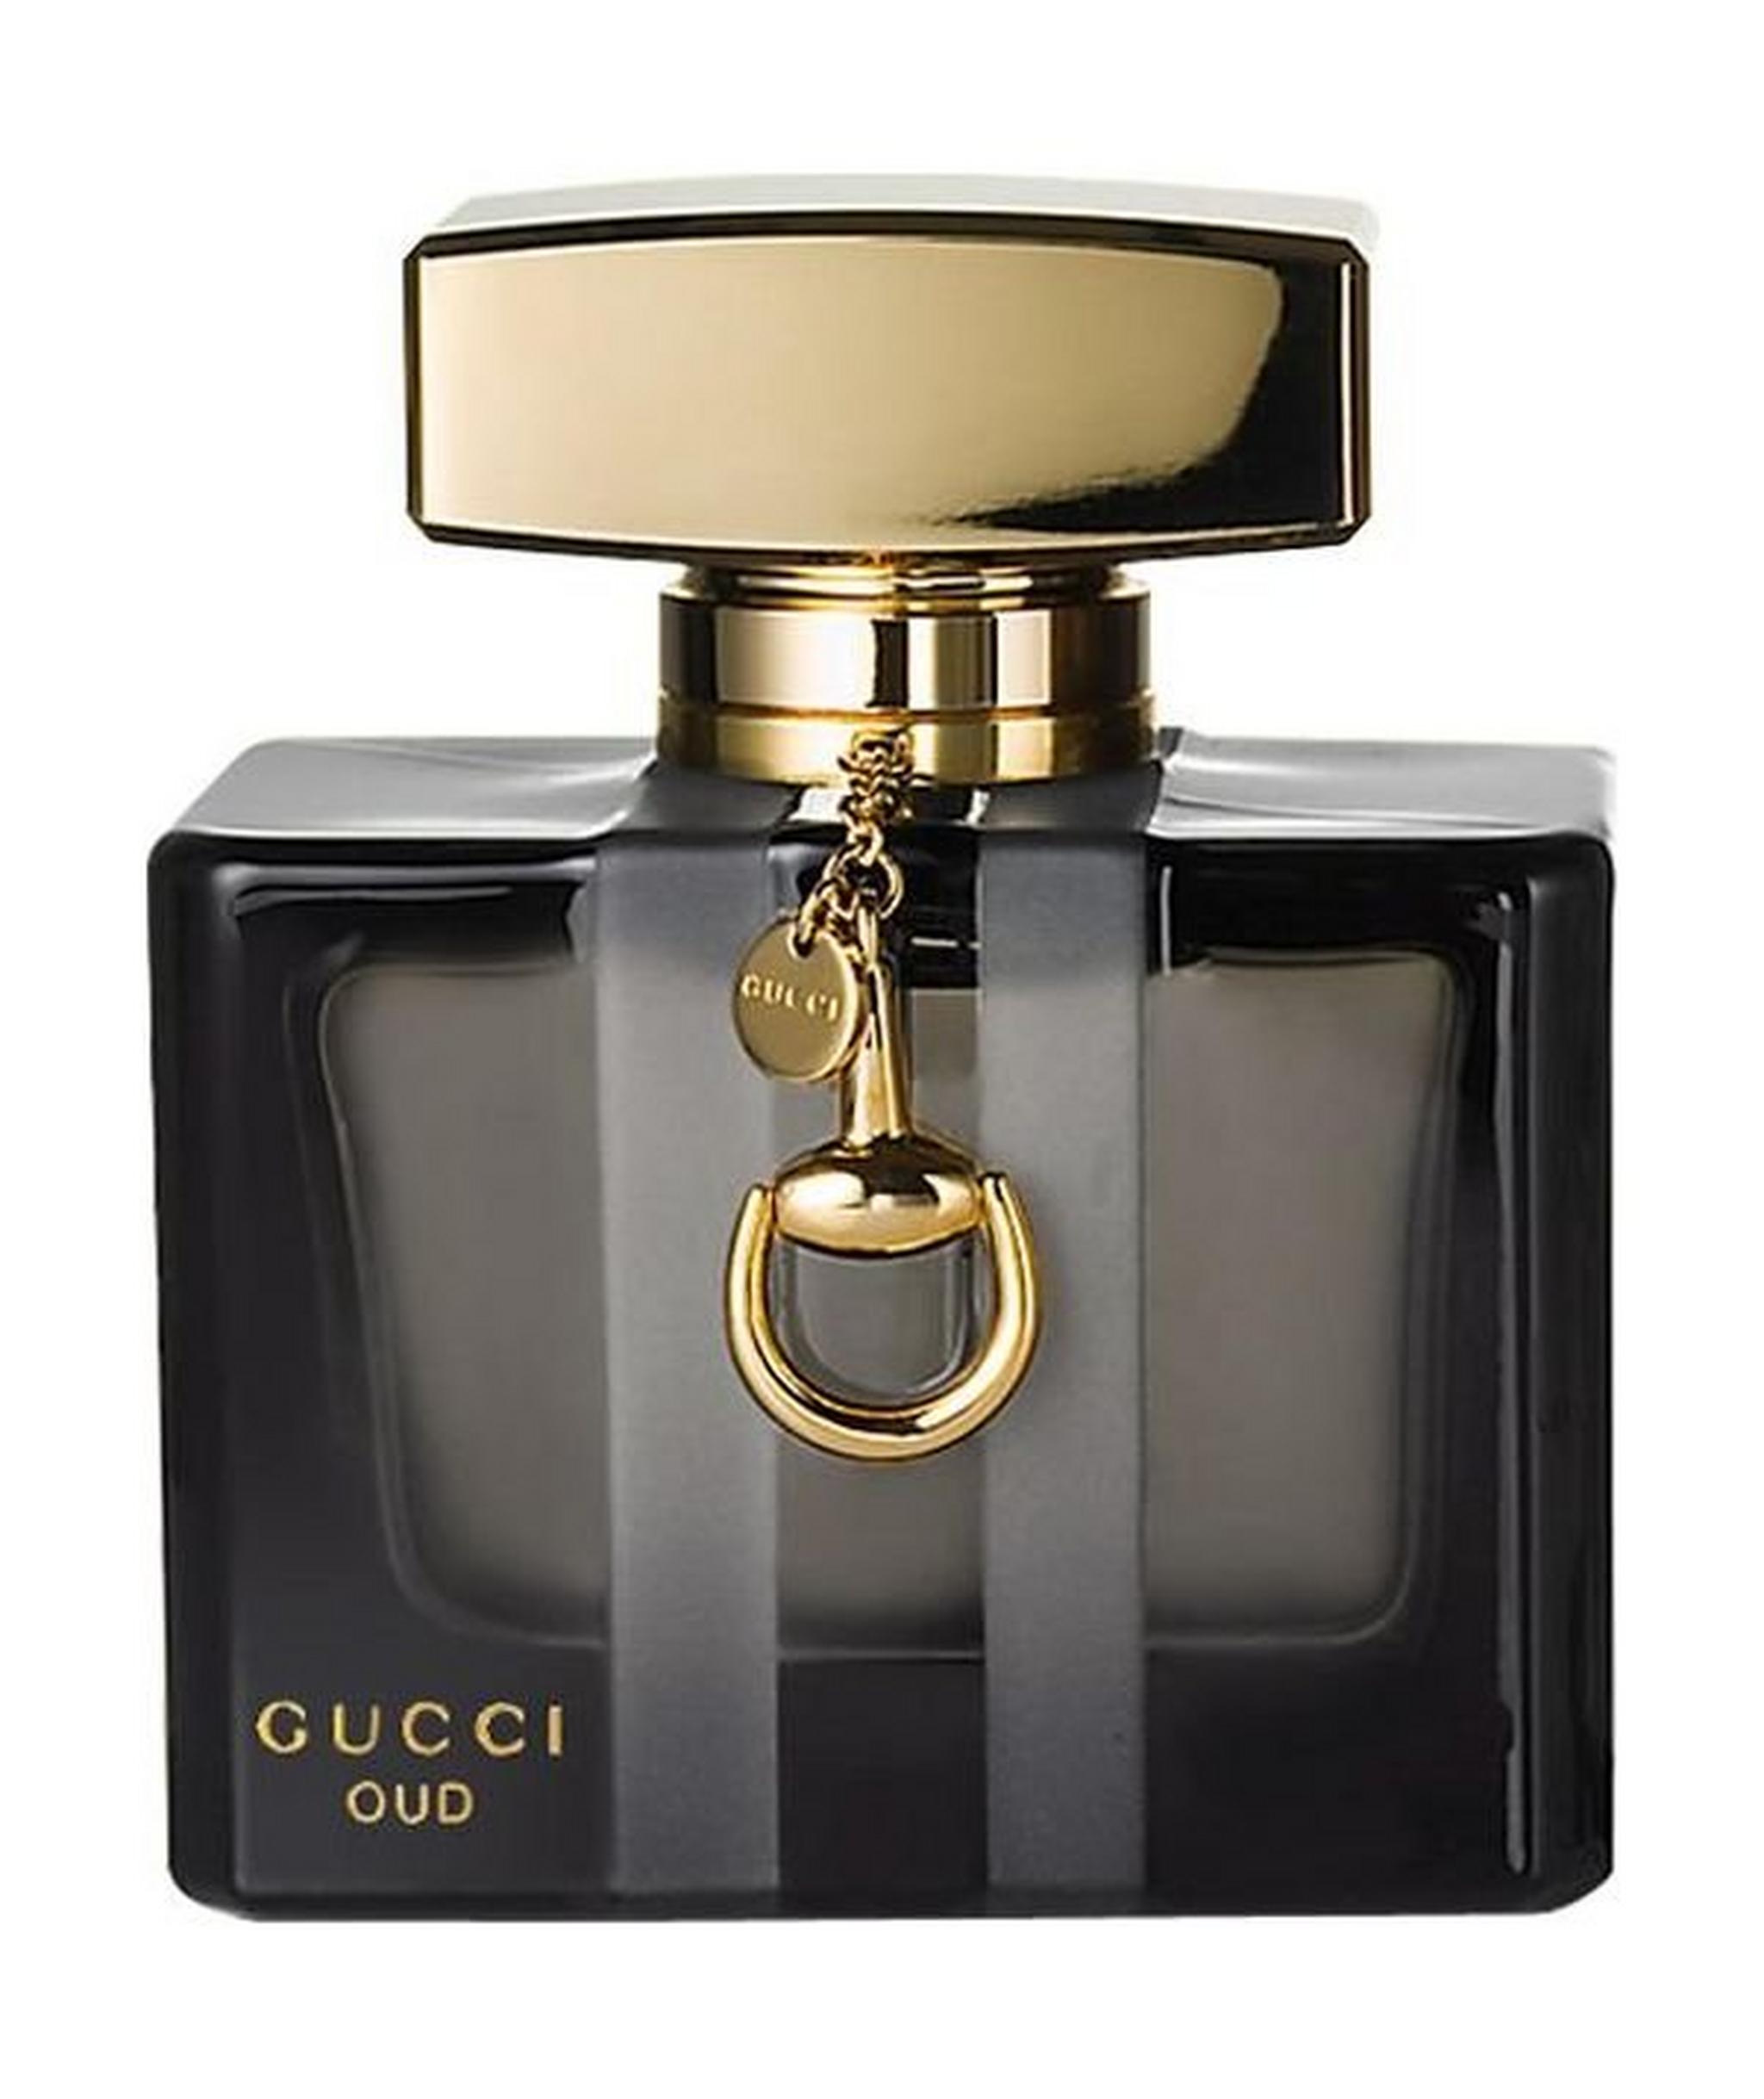 Gucci Oud EDP Perfume for Men and Women 75ml Price in Kuwait - Xcite